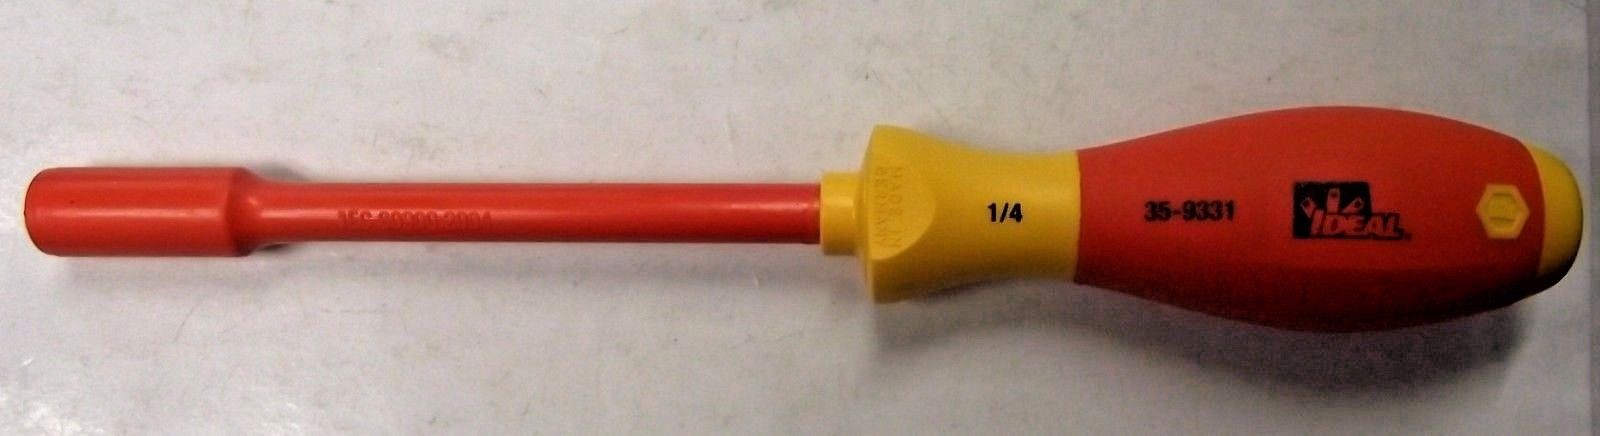 IDEAL Electrical 35-9331 1/4" SAE Insulated Nut Driver Germany